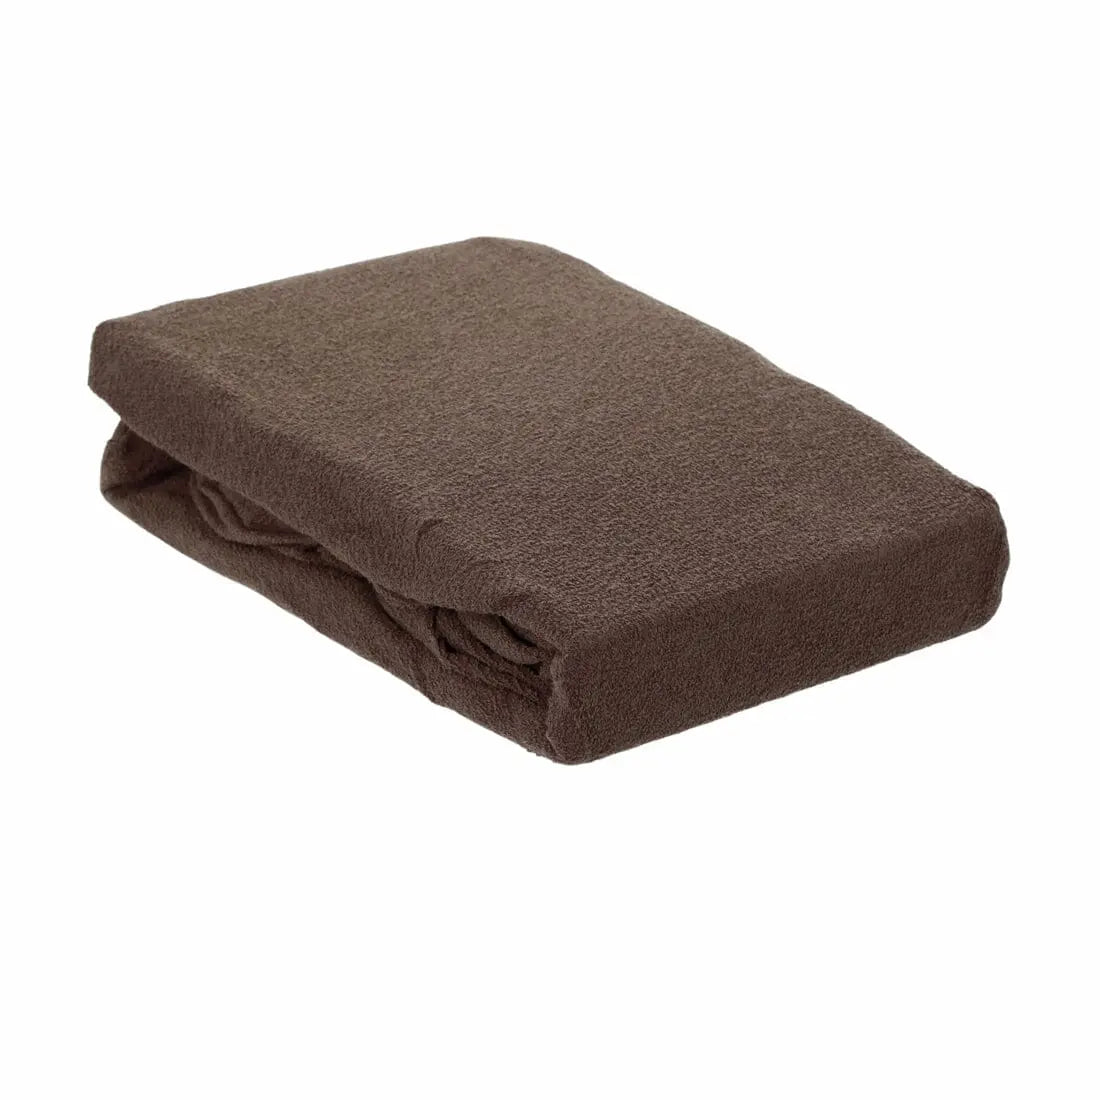 Aztex Classic Value Massage Couch Cover Mocha Without Face Hole 